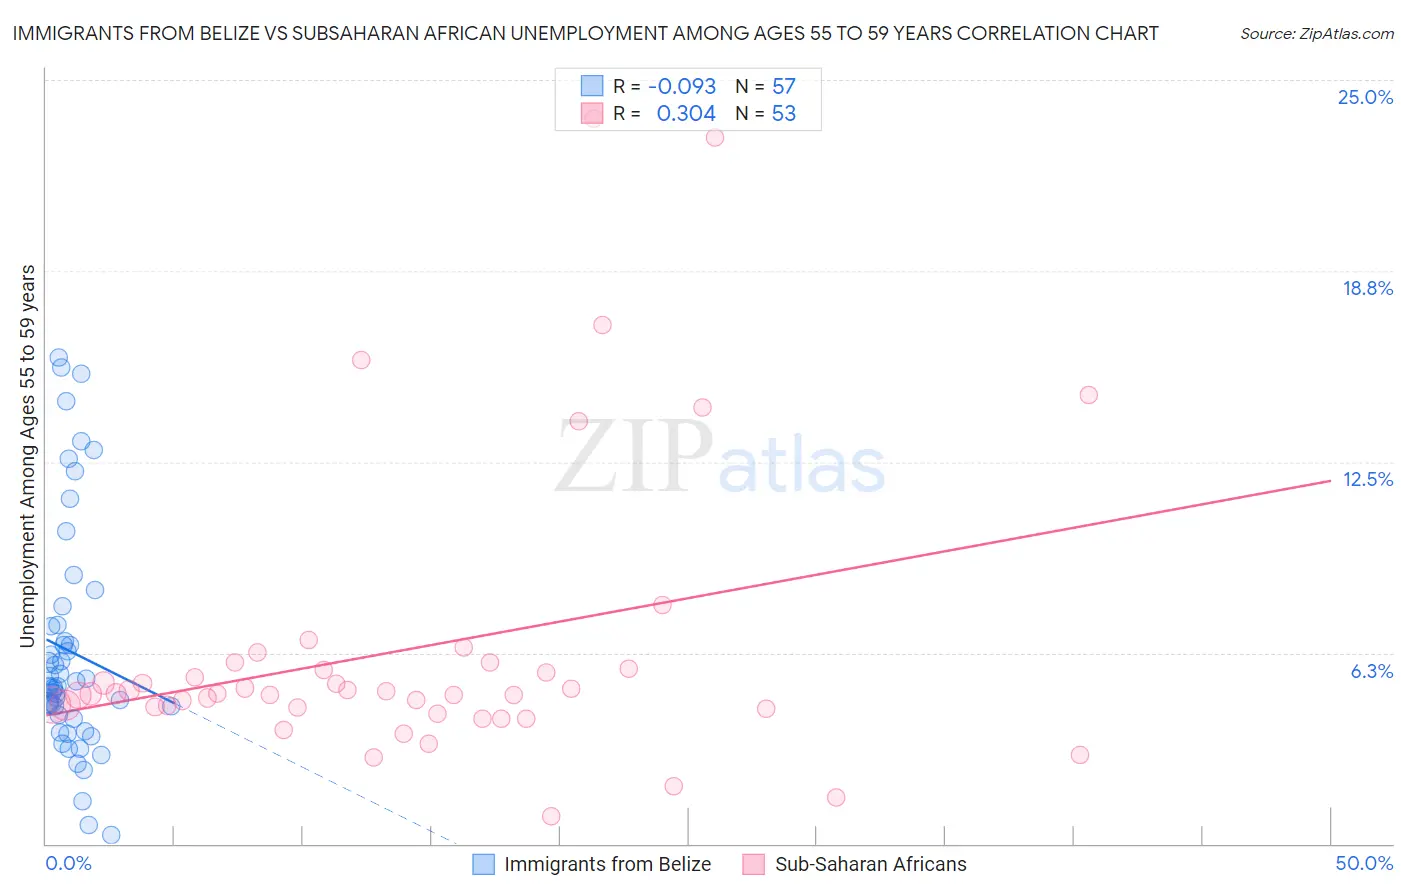 Immigrants from Belize vs Subsaharan African Unemployment Among Ages 55 to 59 years